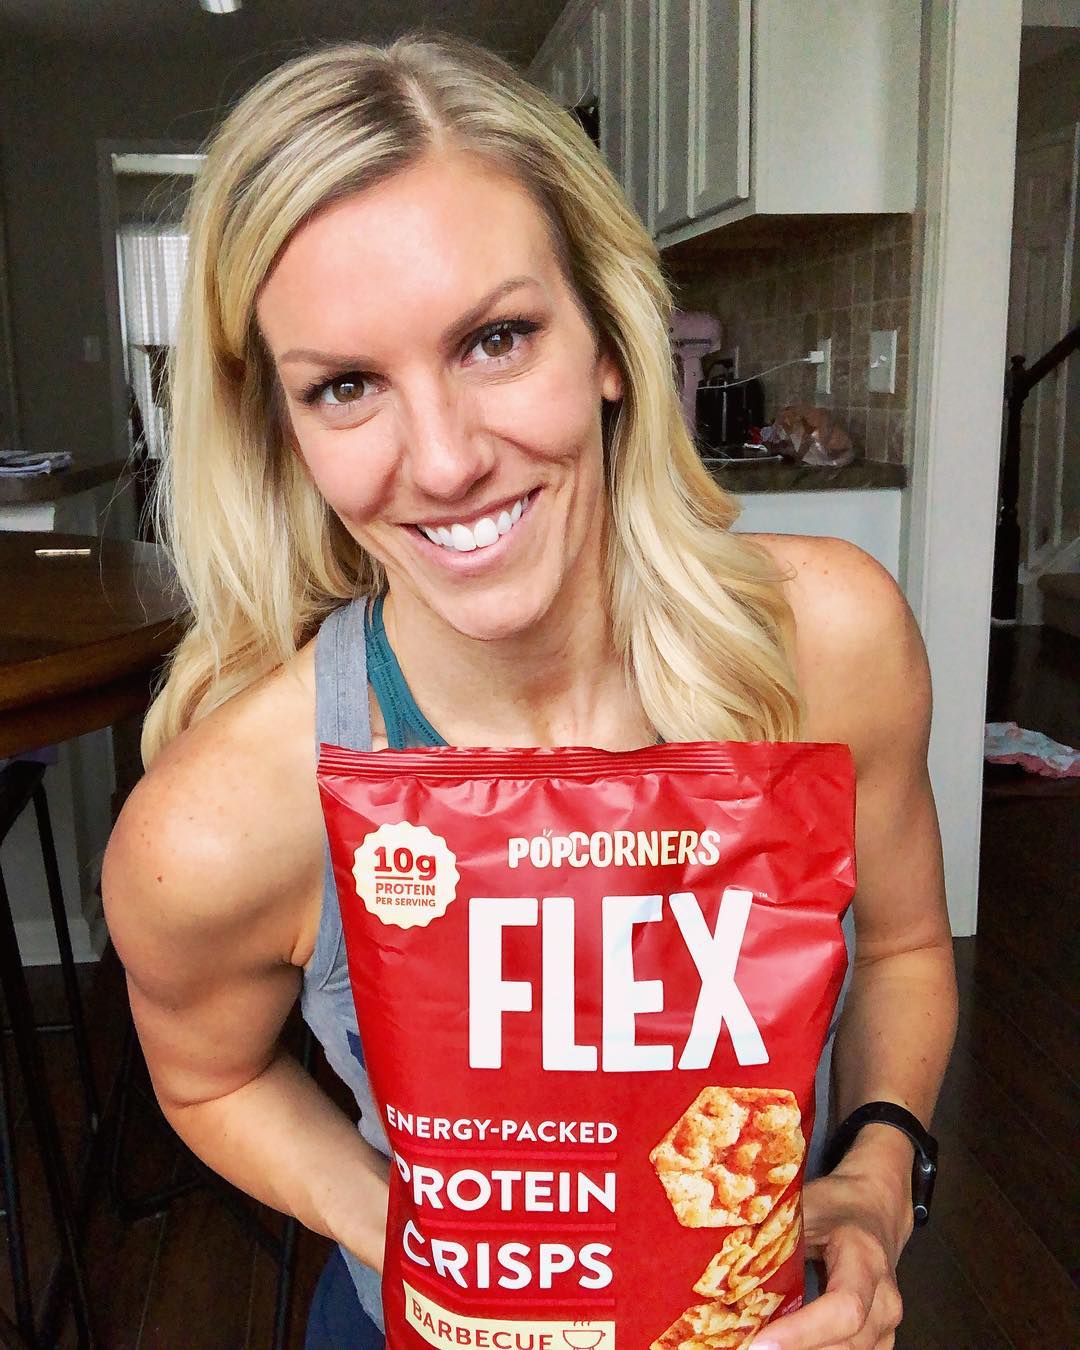 Happy FLEX Friday! I’m teaming up with @popcorners for an amazing giveaway!! 🎉
-
Flex Protein Crisps are energy-packed with 10g of plant-based protein, an on the go snack that tastes great and keeps you going. For when you’re ready to recharge, Flourish Veggie Crisps deliver nutrients from real vegetables, a snack that nourishes your body with lightly salted, airy crisps that satisfy your taste buds. 😋
-
So, are you Ready to FLEX or feeling Free to FLOURISH? I will be selecting 3 winners to win a MONTH SUPPLY of @PopCorners new line of Flex and Flourish!
-
Giveaway Rules :
1. Like this photo
2. Follow me and @popcorners (we check!)
3. Tag all your friends! Each tag is an entry! And let us know if you’re Ready to FLEX or Free to FLOURISH!
-
Winners will be selected on March 11th ‪at midnight PST‬ and will be contacted via DM.
-
Open to residents of the US and Canada only.
-
#macroswithem #giveaway #popcorners #snacktime #flexibledieting #macros #iifym #healthyfood #foodisfuel